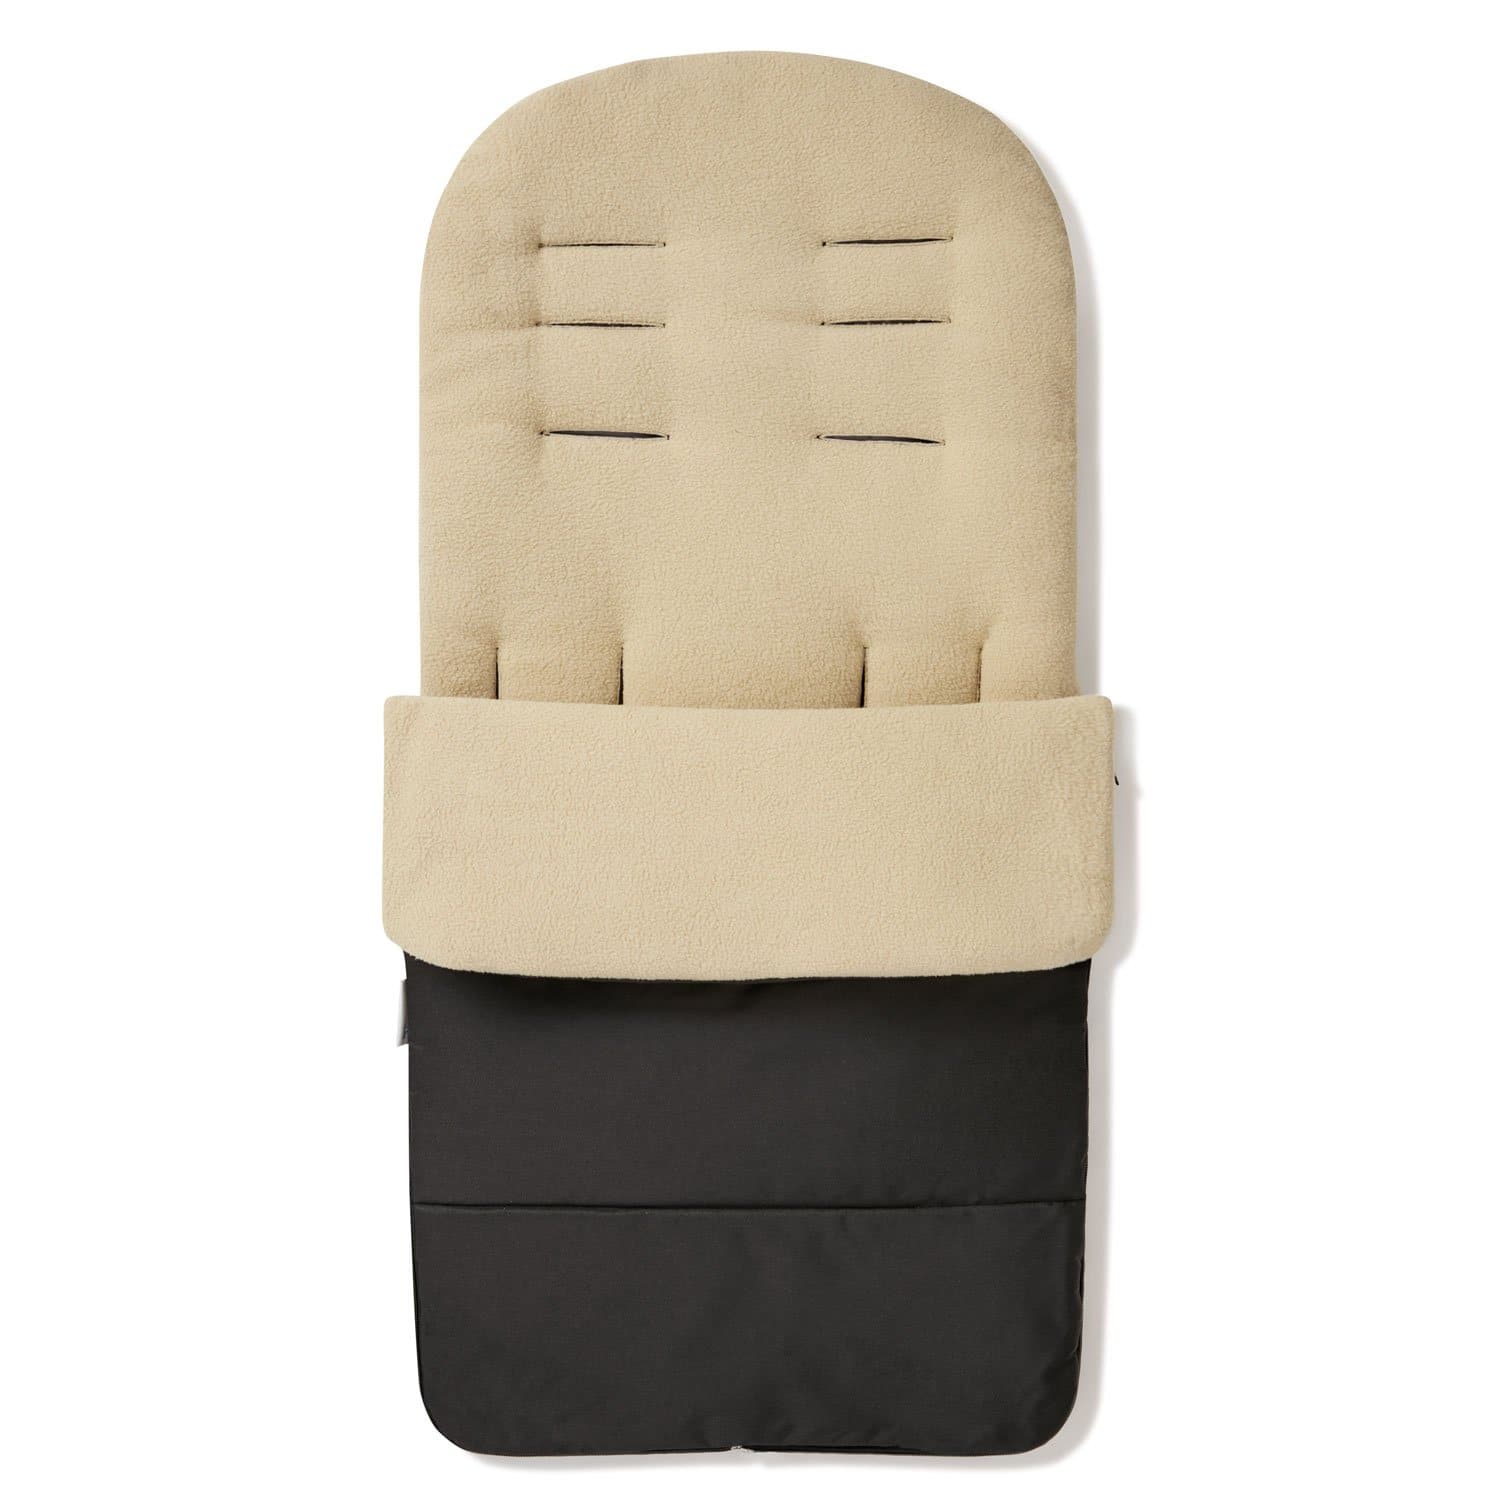 Premium Footmuff / Cosy Toes Compatible with Baby Weavers - Desert Sand / Fits All Models | For Your Little One